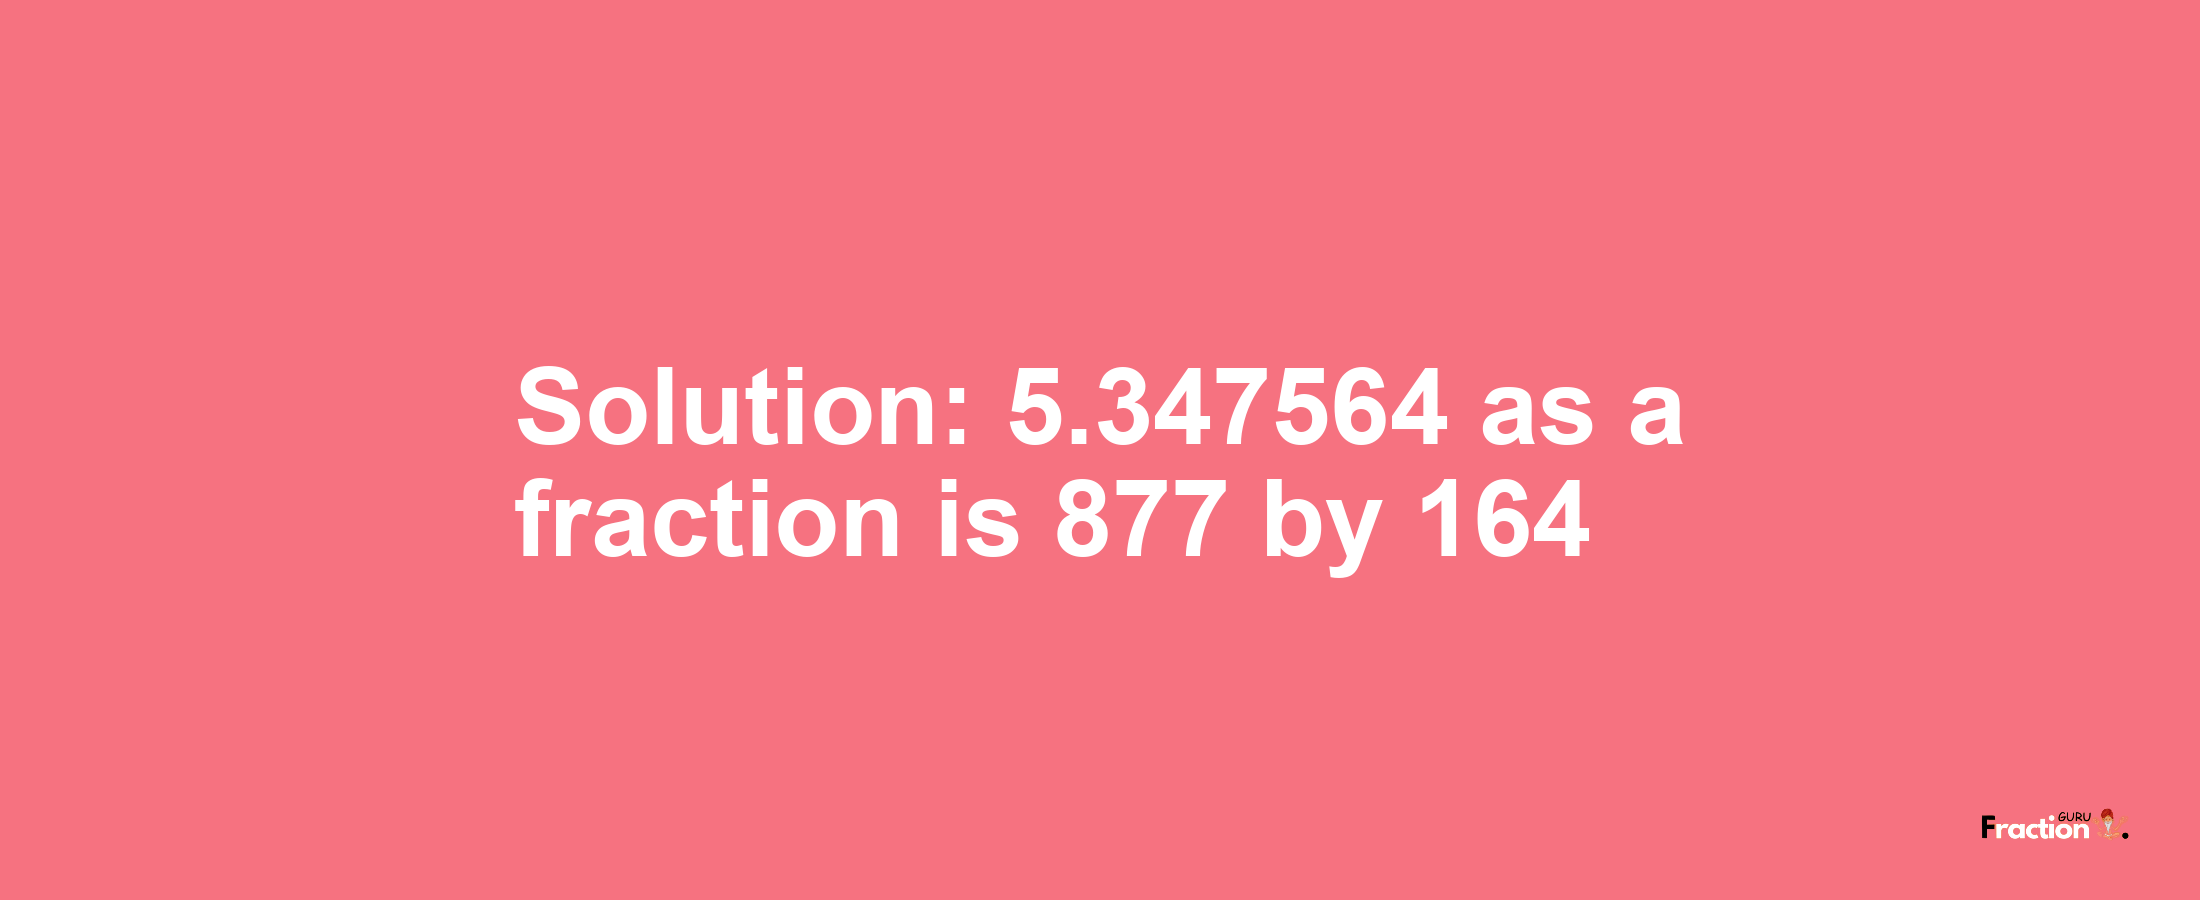 Solution:5.347564 as a fraction is 877/164